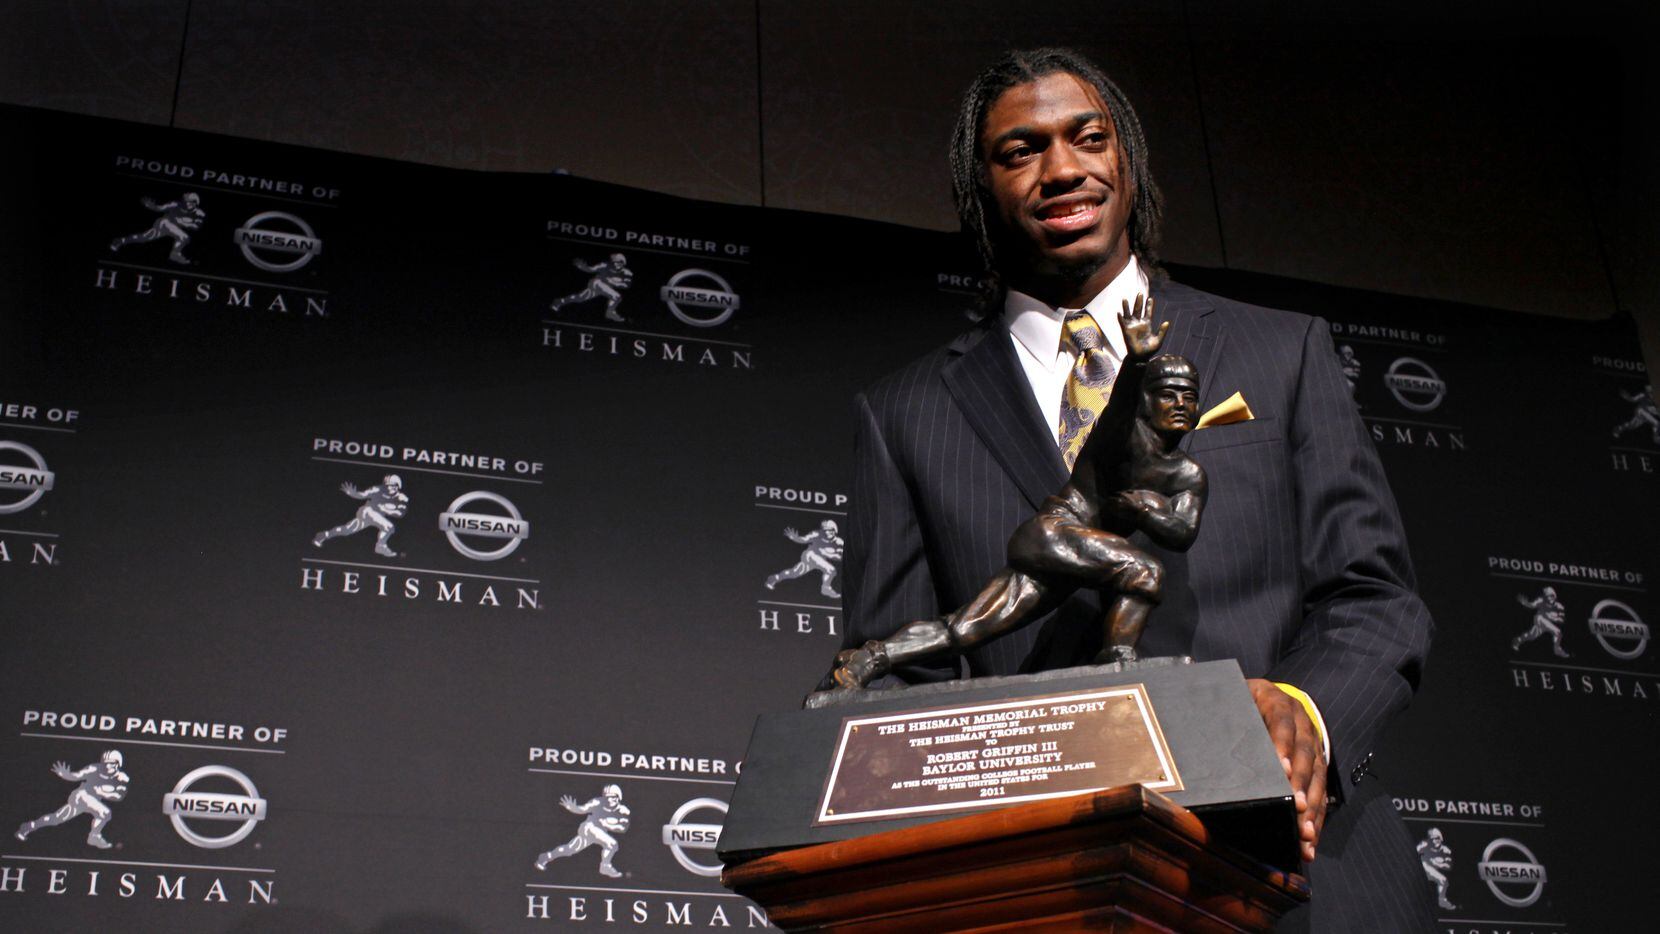 Heisman Trophy winner Robert Griffin III, of Baylor, is photographed with the award during a...